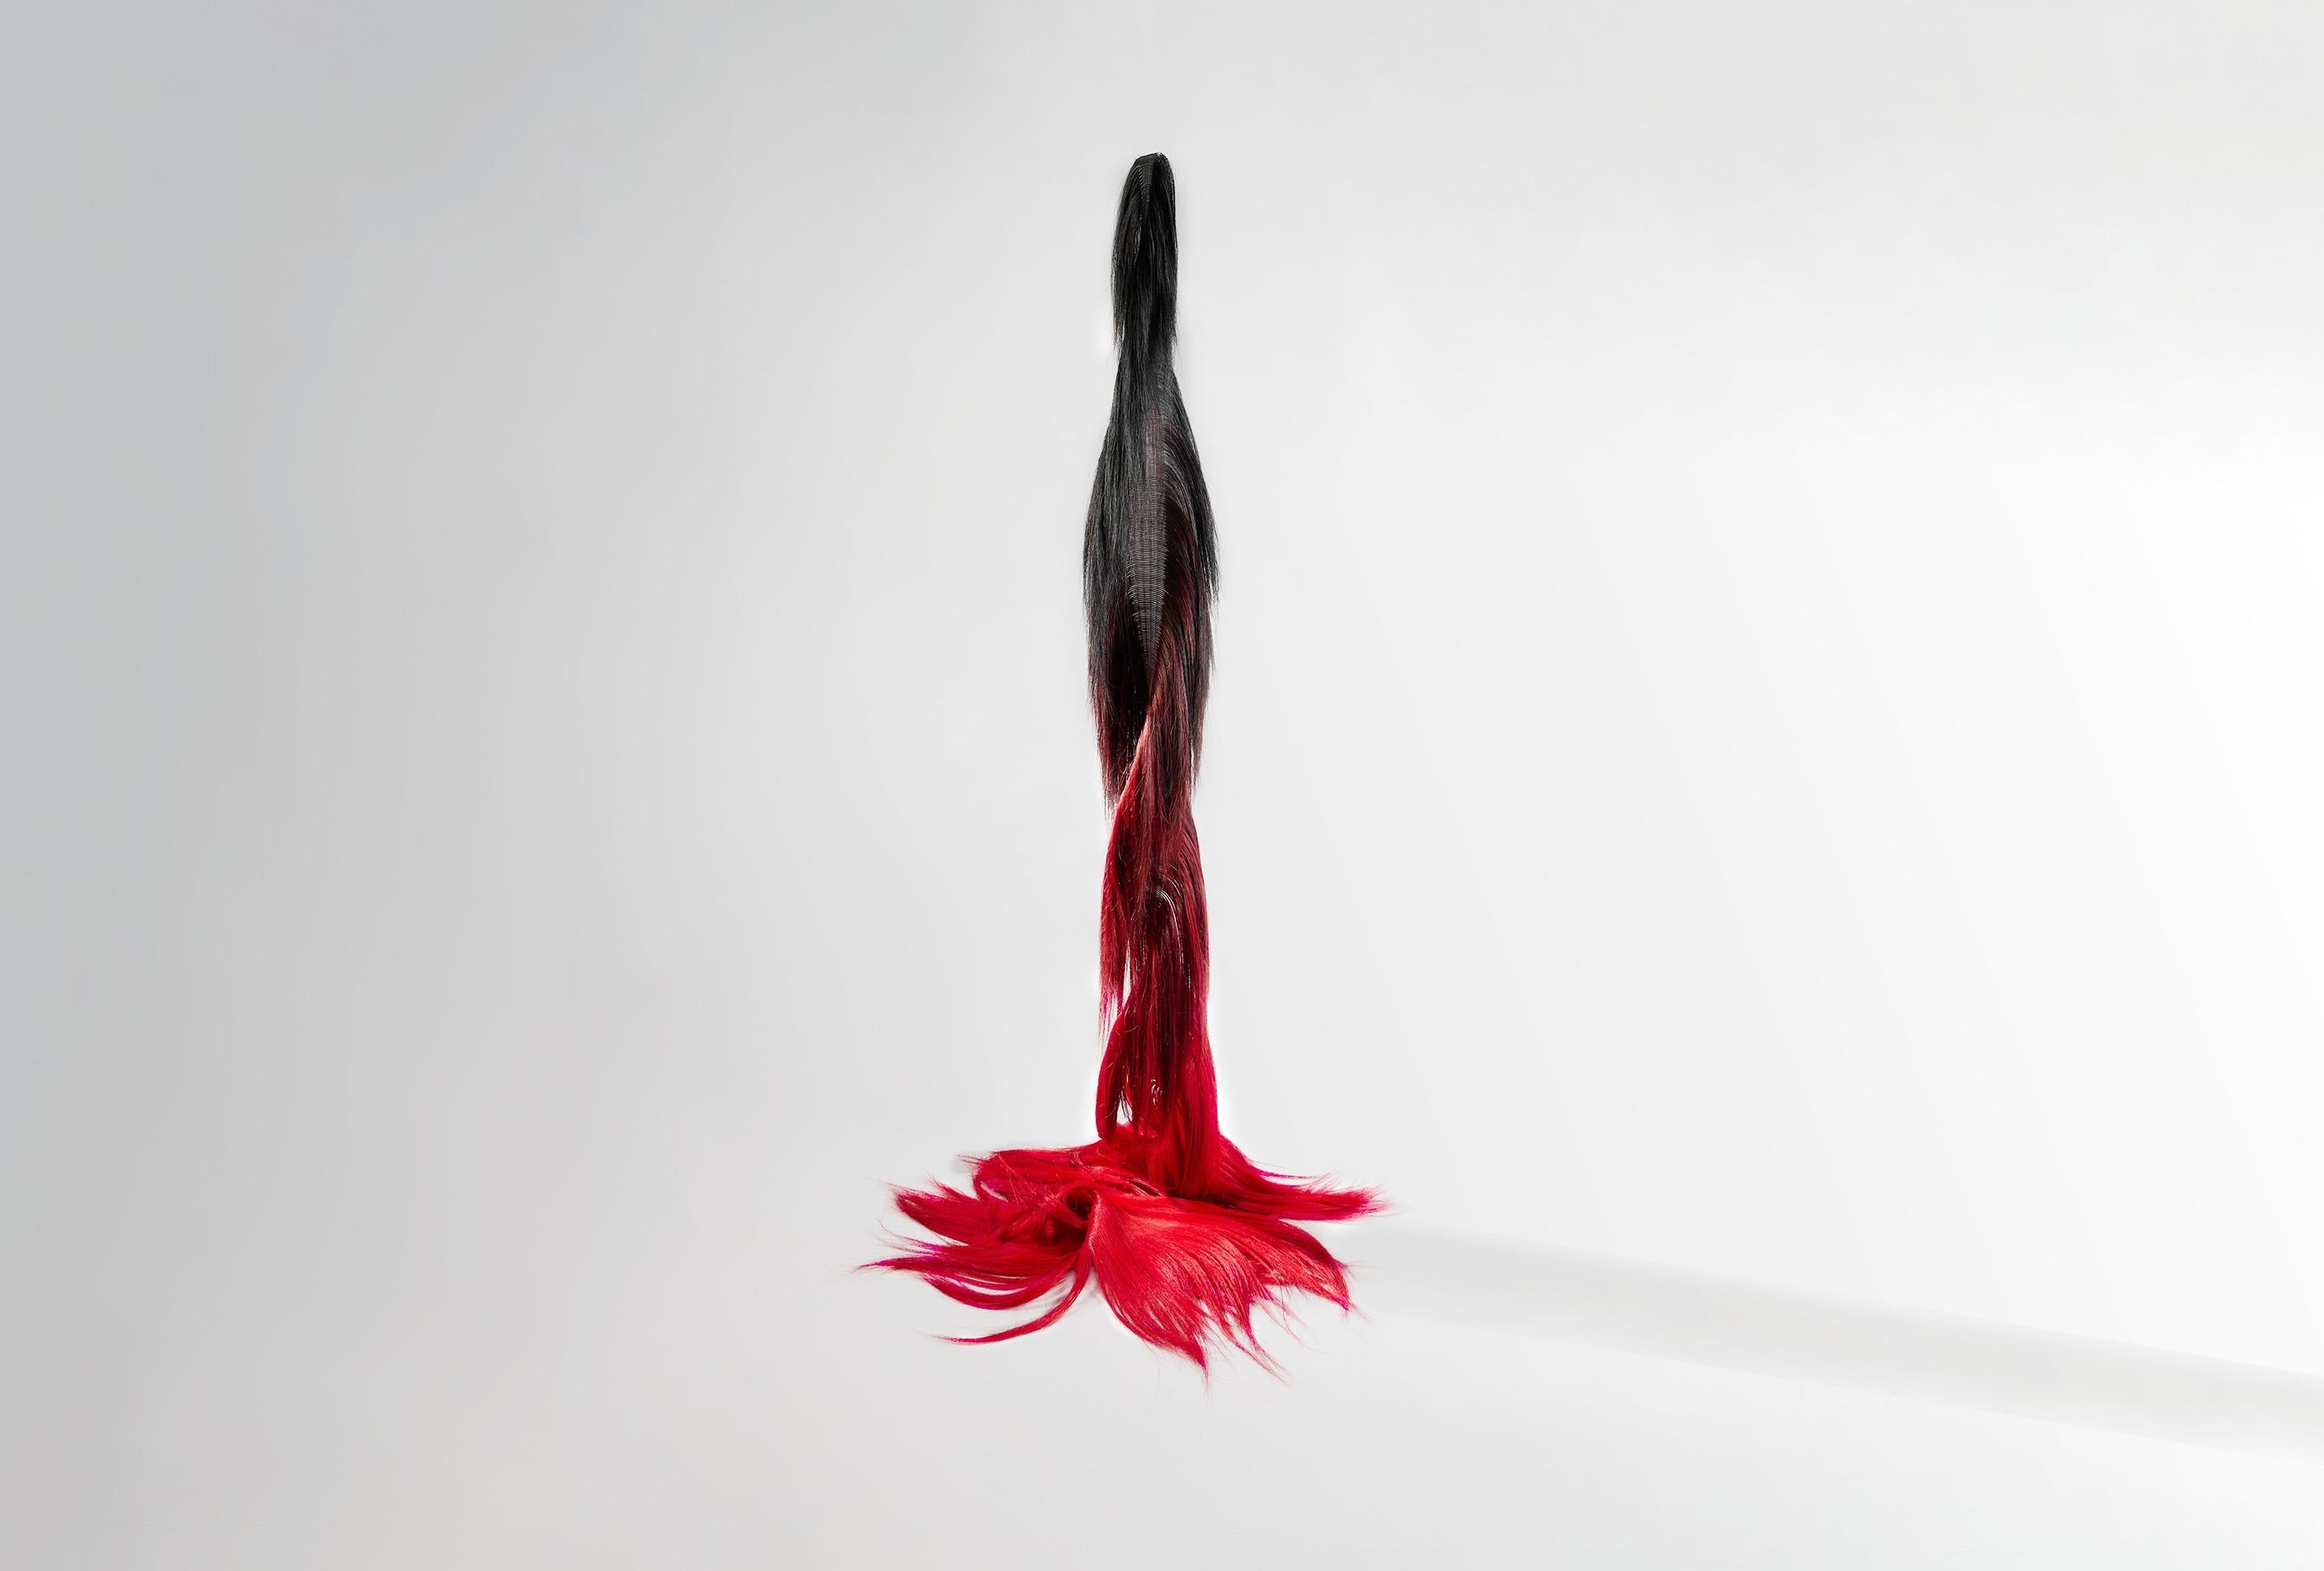 Contemporary Présence Black Rubis, Horsehair and Nylon sculpture by Ulrika Lljedahl For Sale